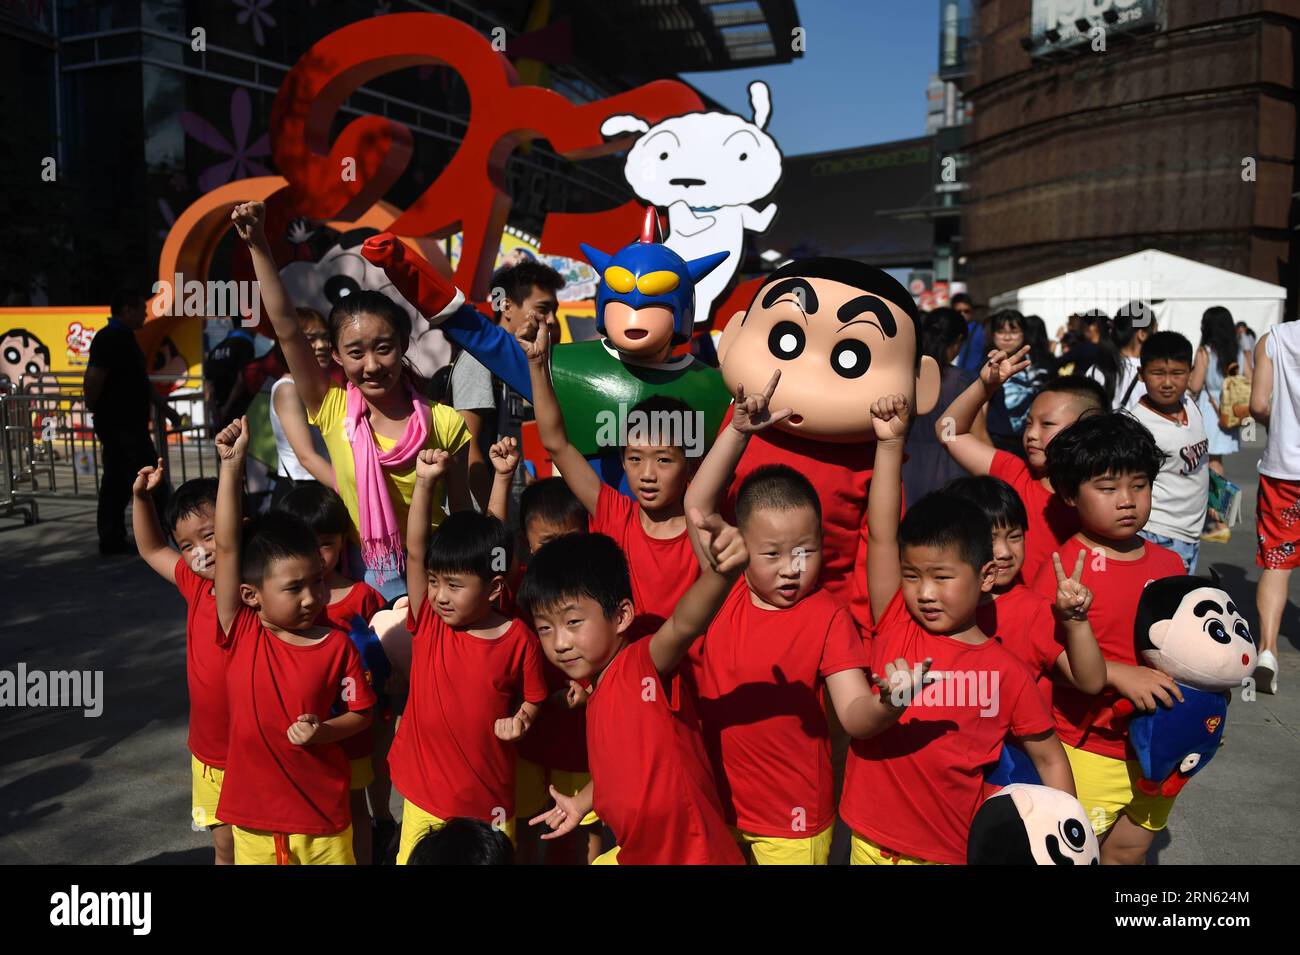 (150708) -- SHENYANG, July 8, 2015 -- Children pose with cartoon figures during the launching ceremony of the exhibition marking the 25th anniversary of Japanese manga series Crayon Shin-chan in Shenyang, northeast China s Liaoning Province, July 8, 2015. The exhibition will be open to public on July 11. ) (zkr) CHINA-SHENYANG-CRAYON SHIN-CHAN-25TH ANNIVERSARY(CN) PanxYulong PUBLICATIONxNOTxINxCHN   150708 Shenyang July 8 2015 Children Pose With Cartoon Figures during The Launching Ceremony of The Exhibition marking The 25th Anniversary of Japanese Manga Series crayon Shin Chan in Shenyang Nor Stock Photo